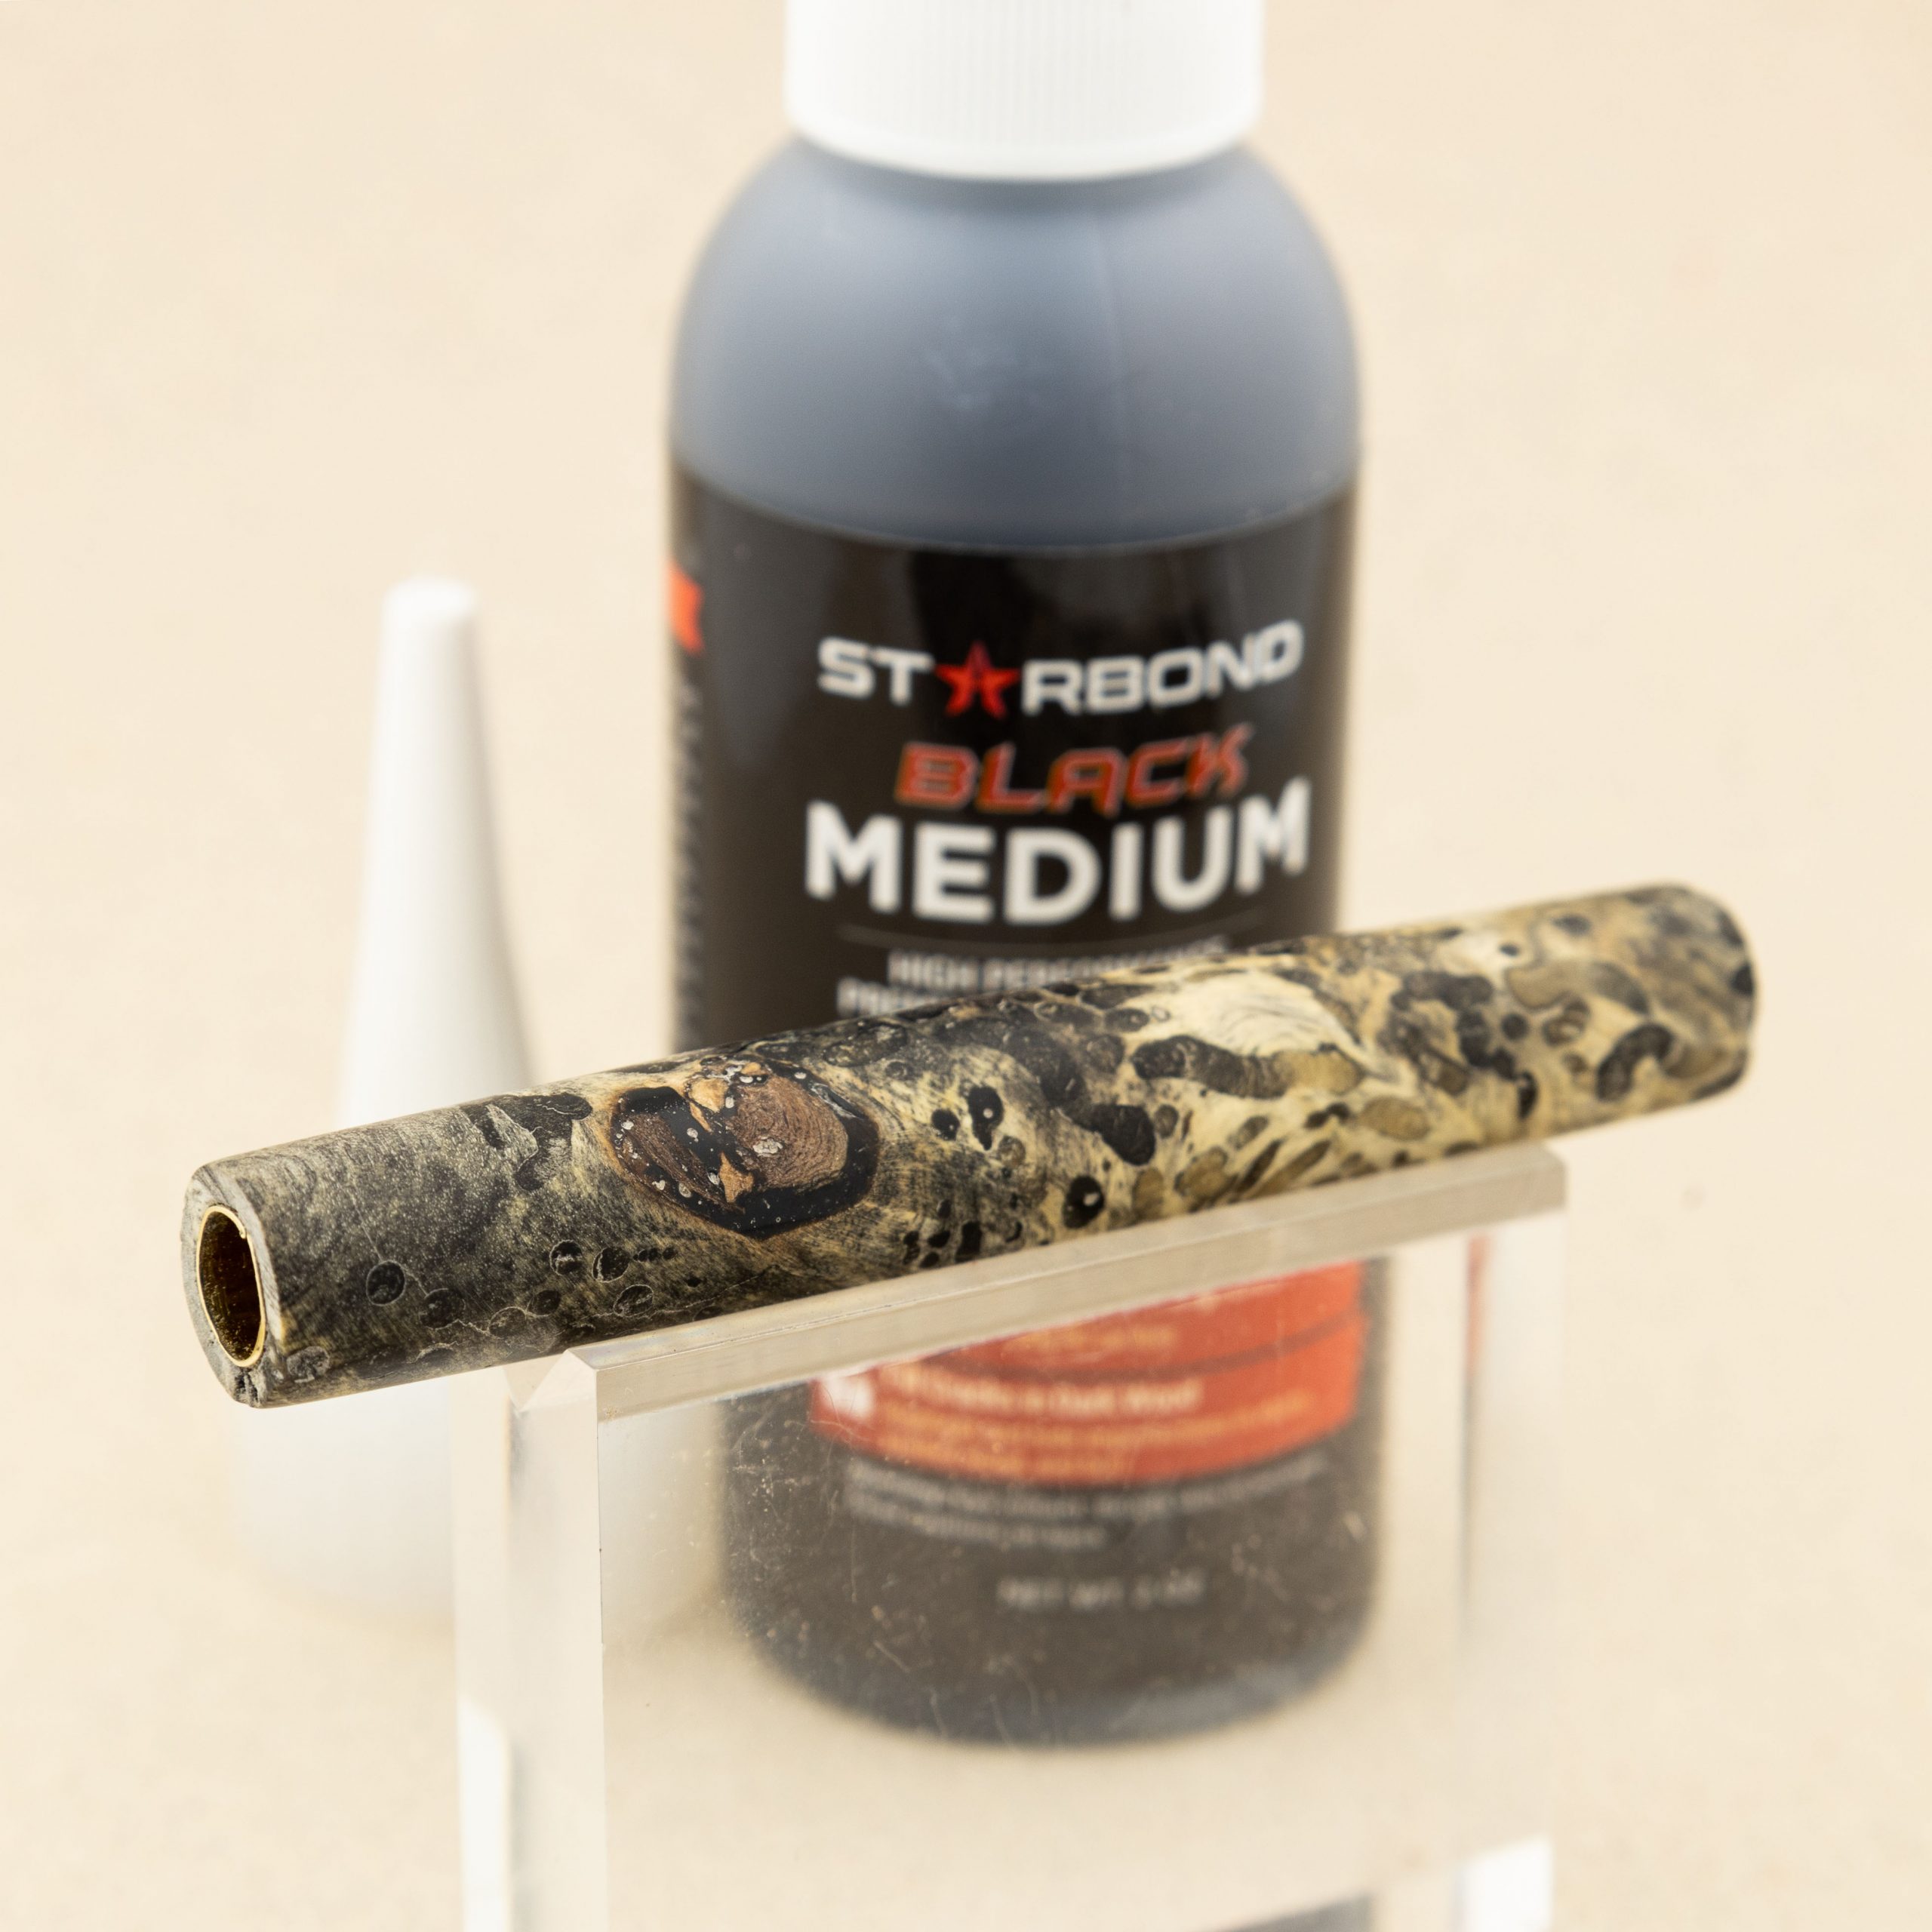 Buckeye burl wood pen blank turned and finished with Starbond Black Medium CA Glue next to a 2oz bottle of Starbond Black CA Glue